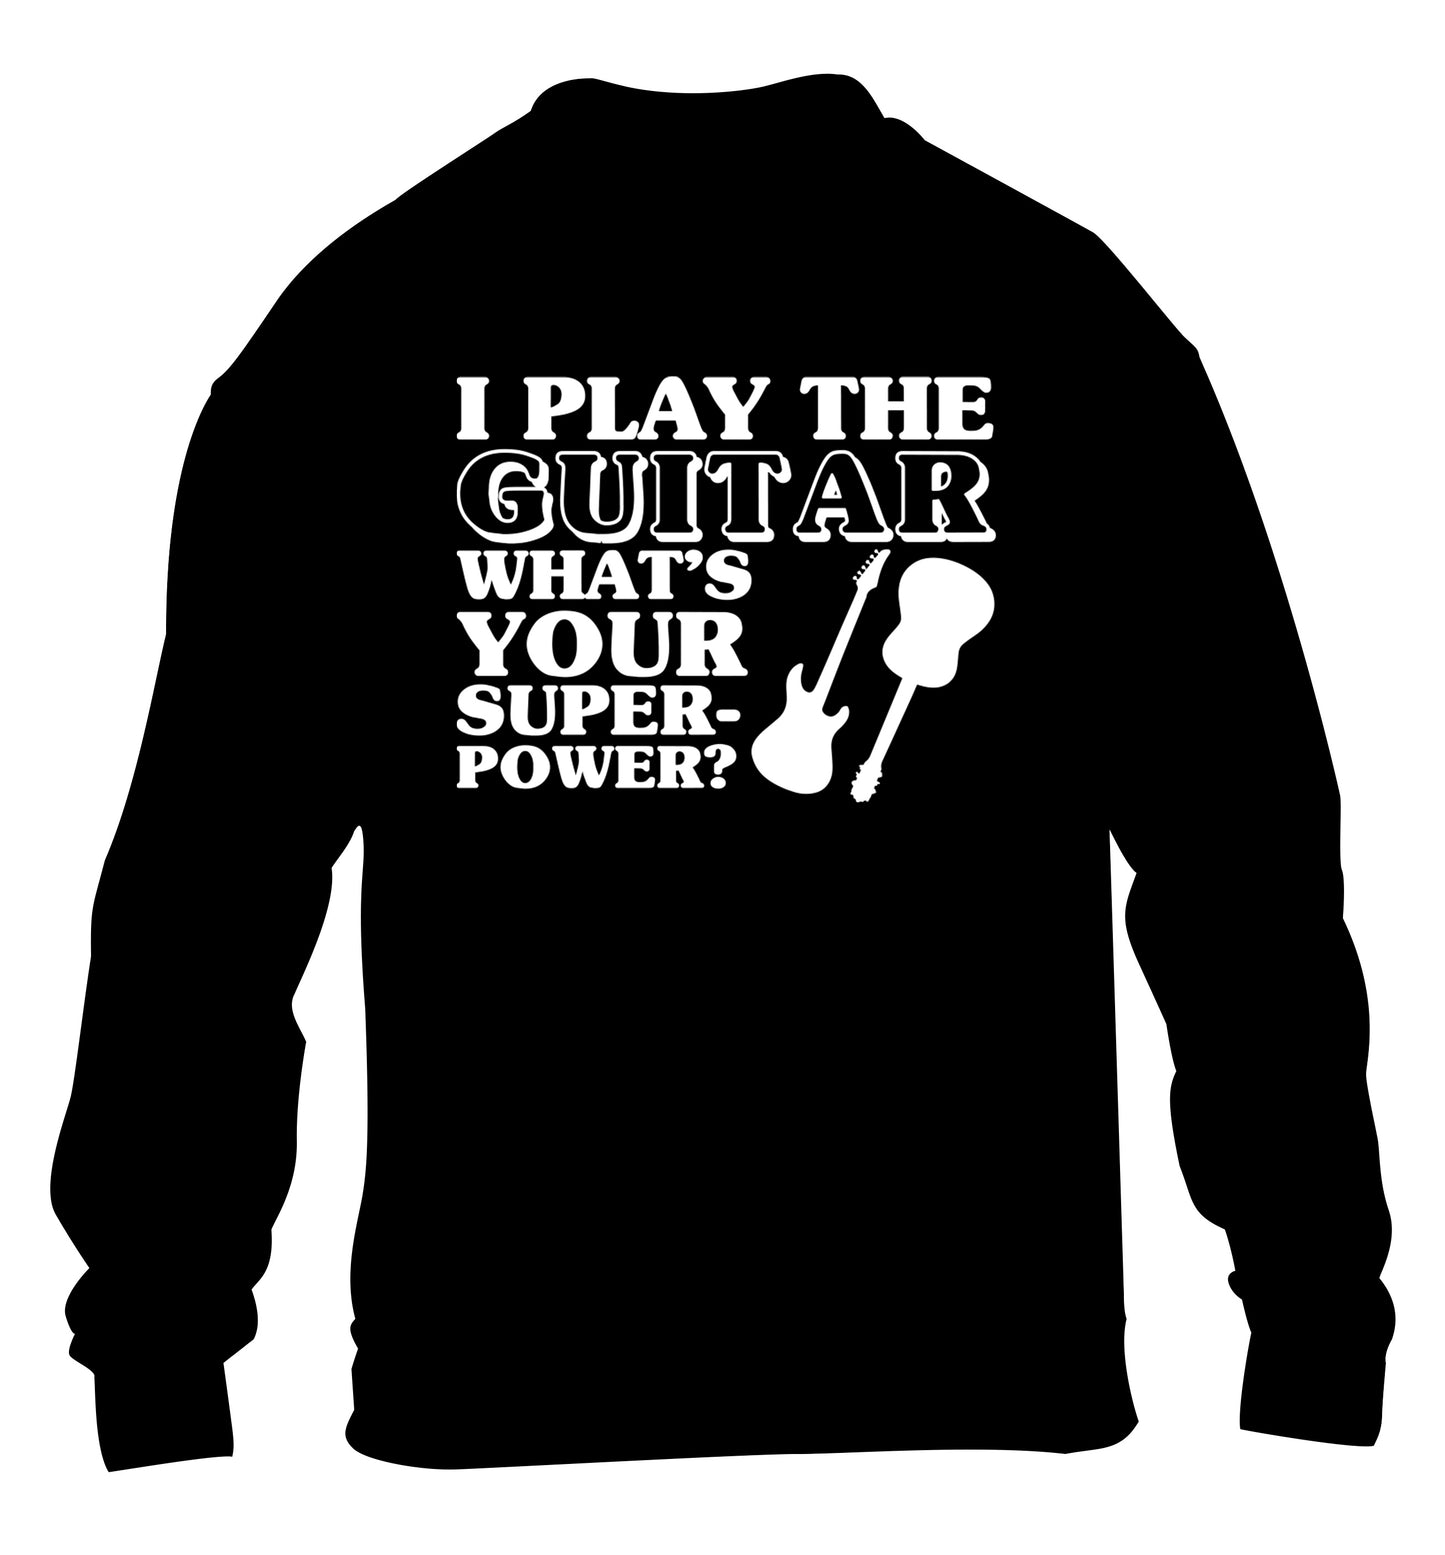 I play the guitar what's your superpower? children's black sweater 3-4 Years